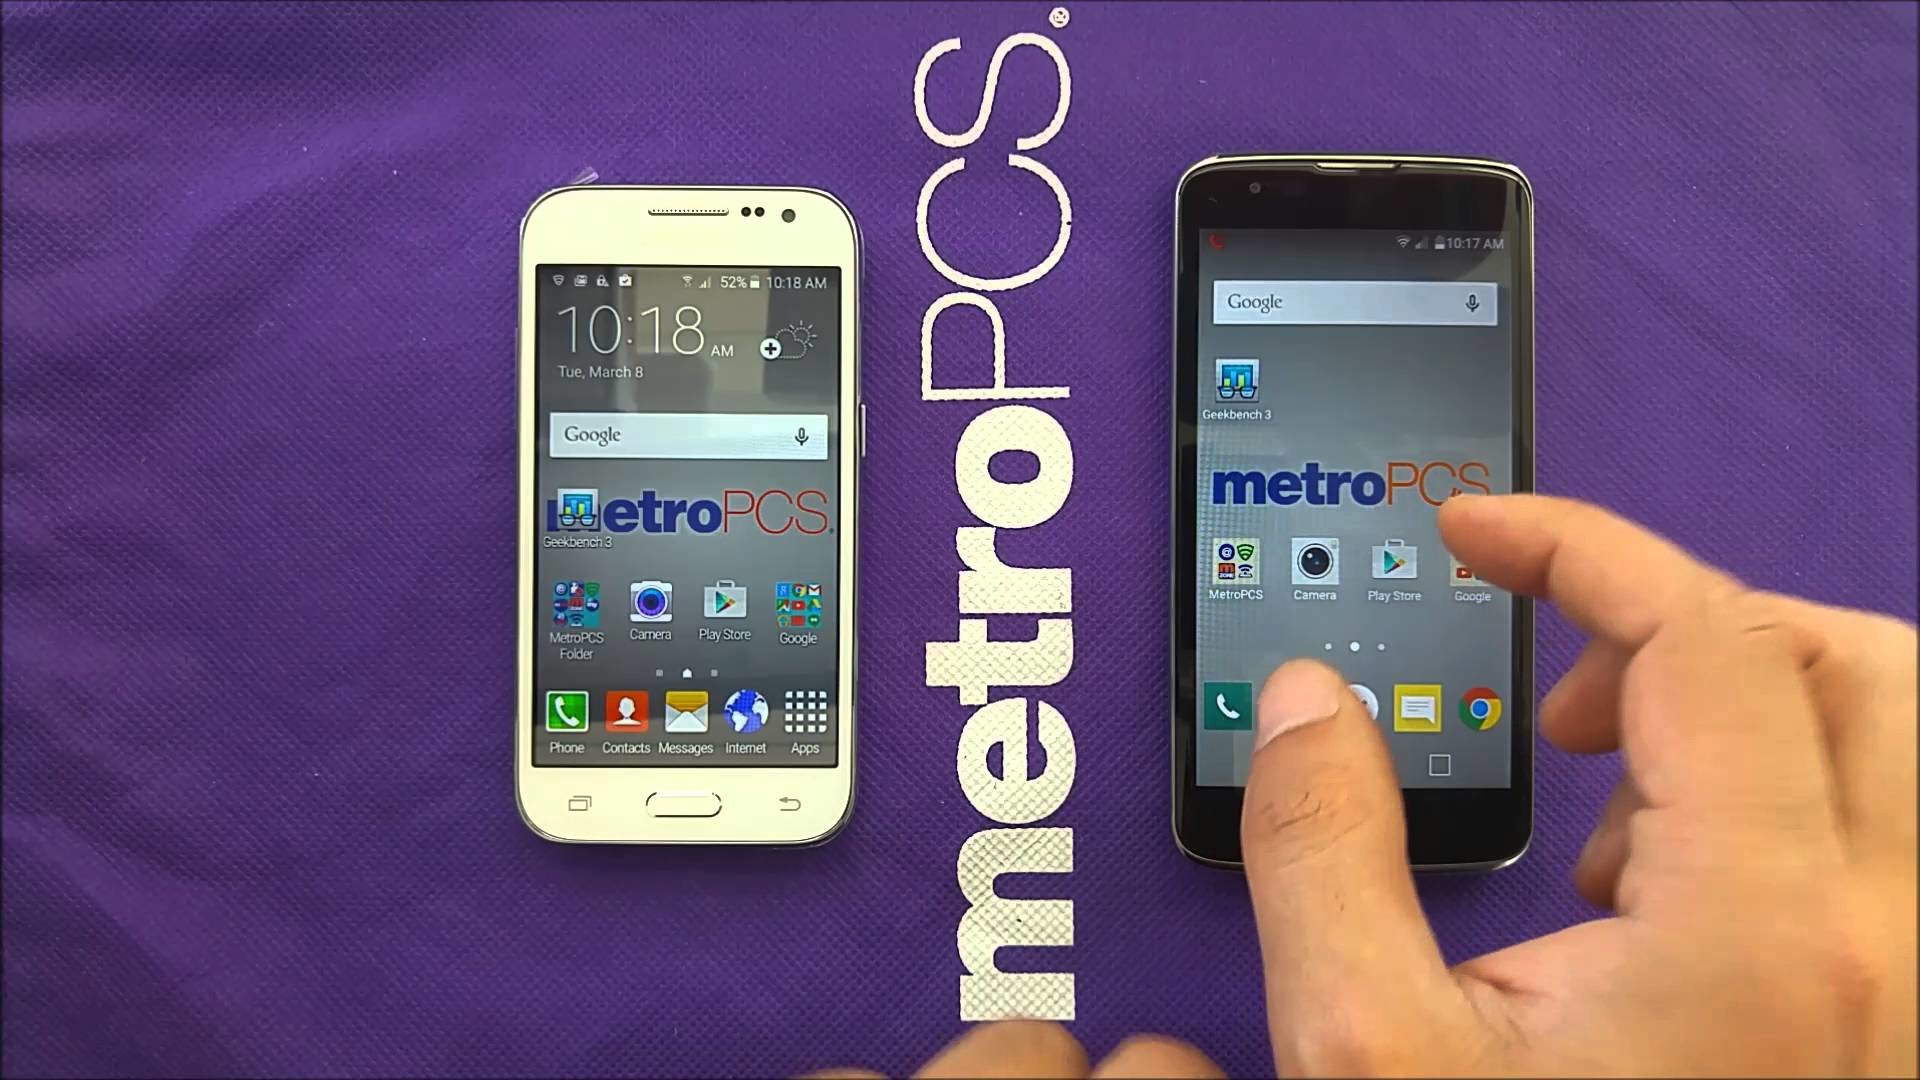 1920x1080 Comparison LG K7 With Samsung Galaxy core Prime For Metro Pcs\T-mobile -  YouTube